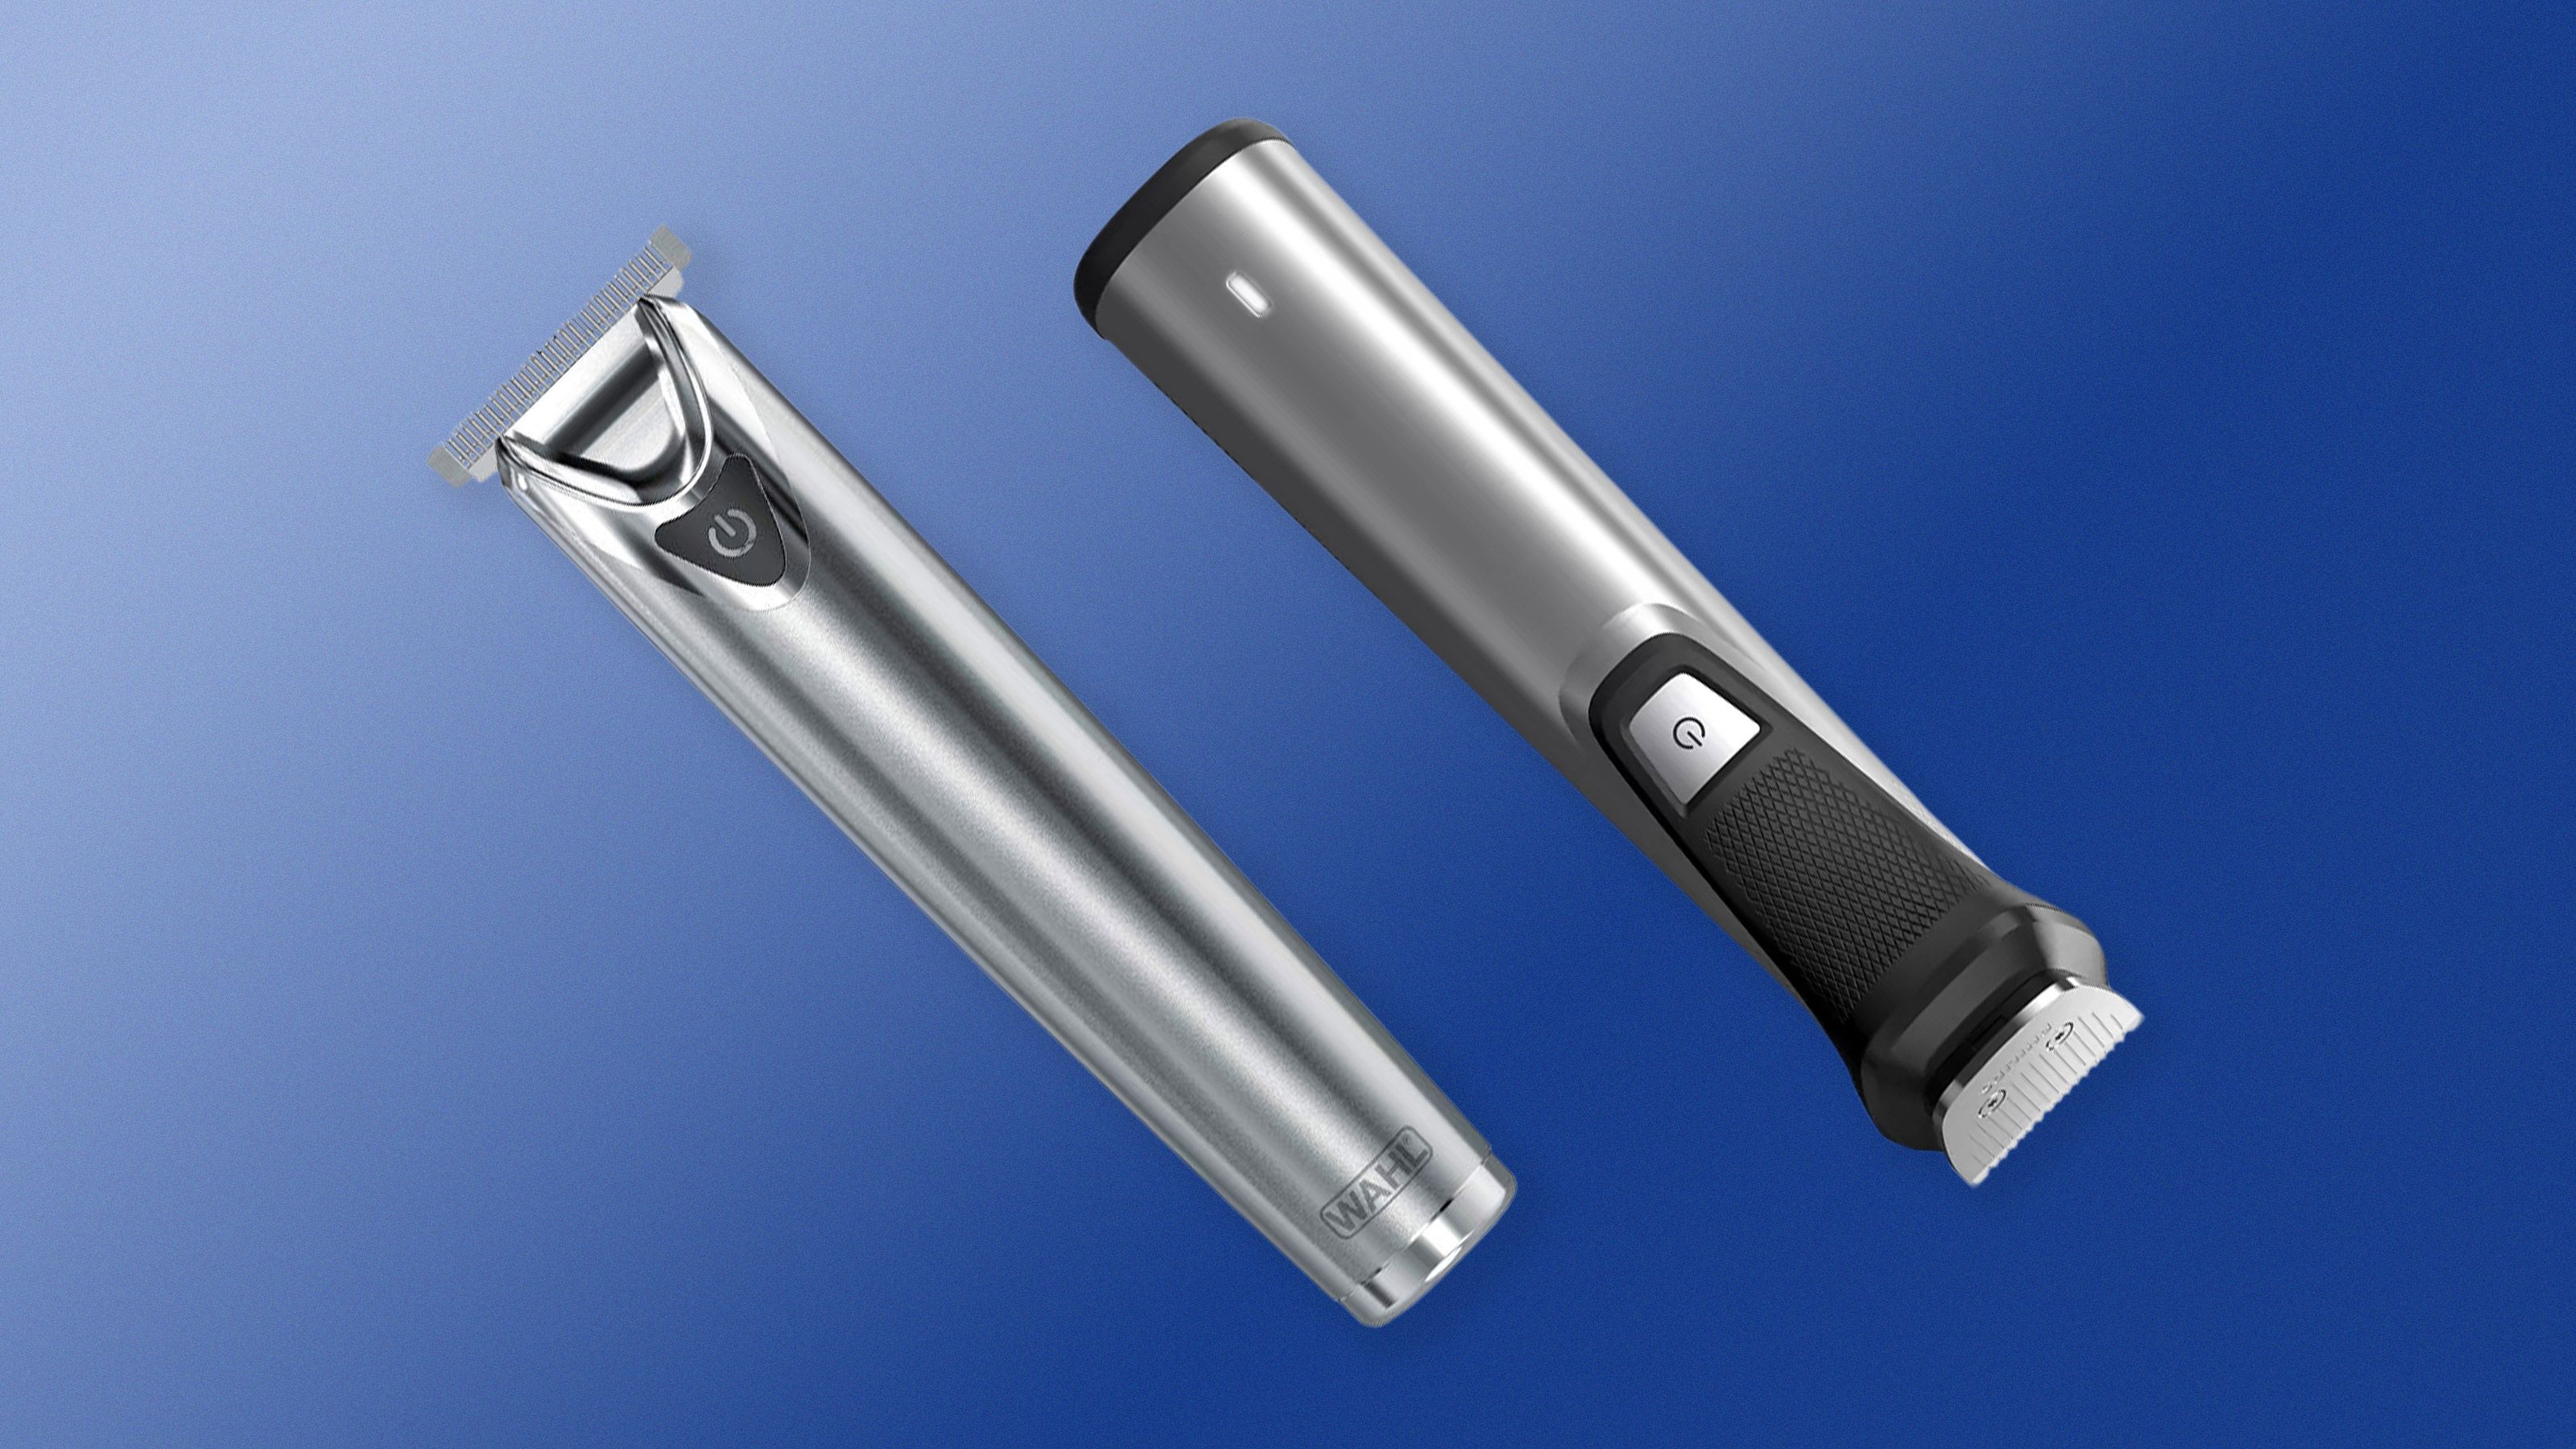 Philips Norelco vs. Wahl: Which Beard Trimmer Is Better?